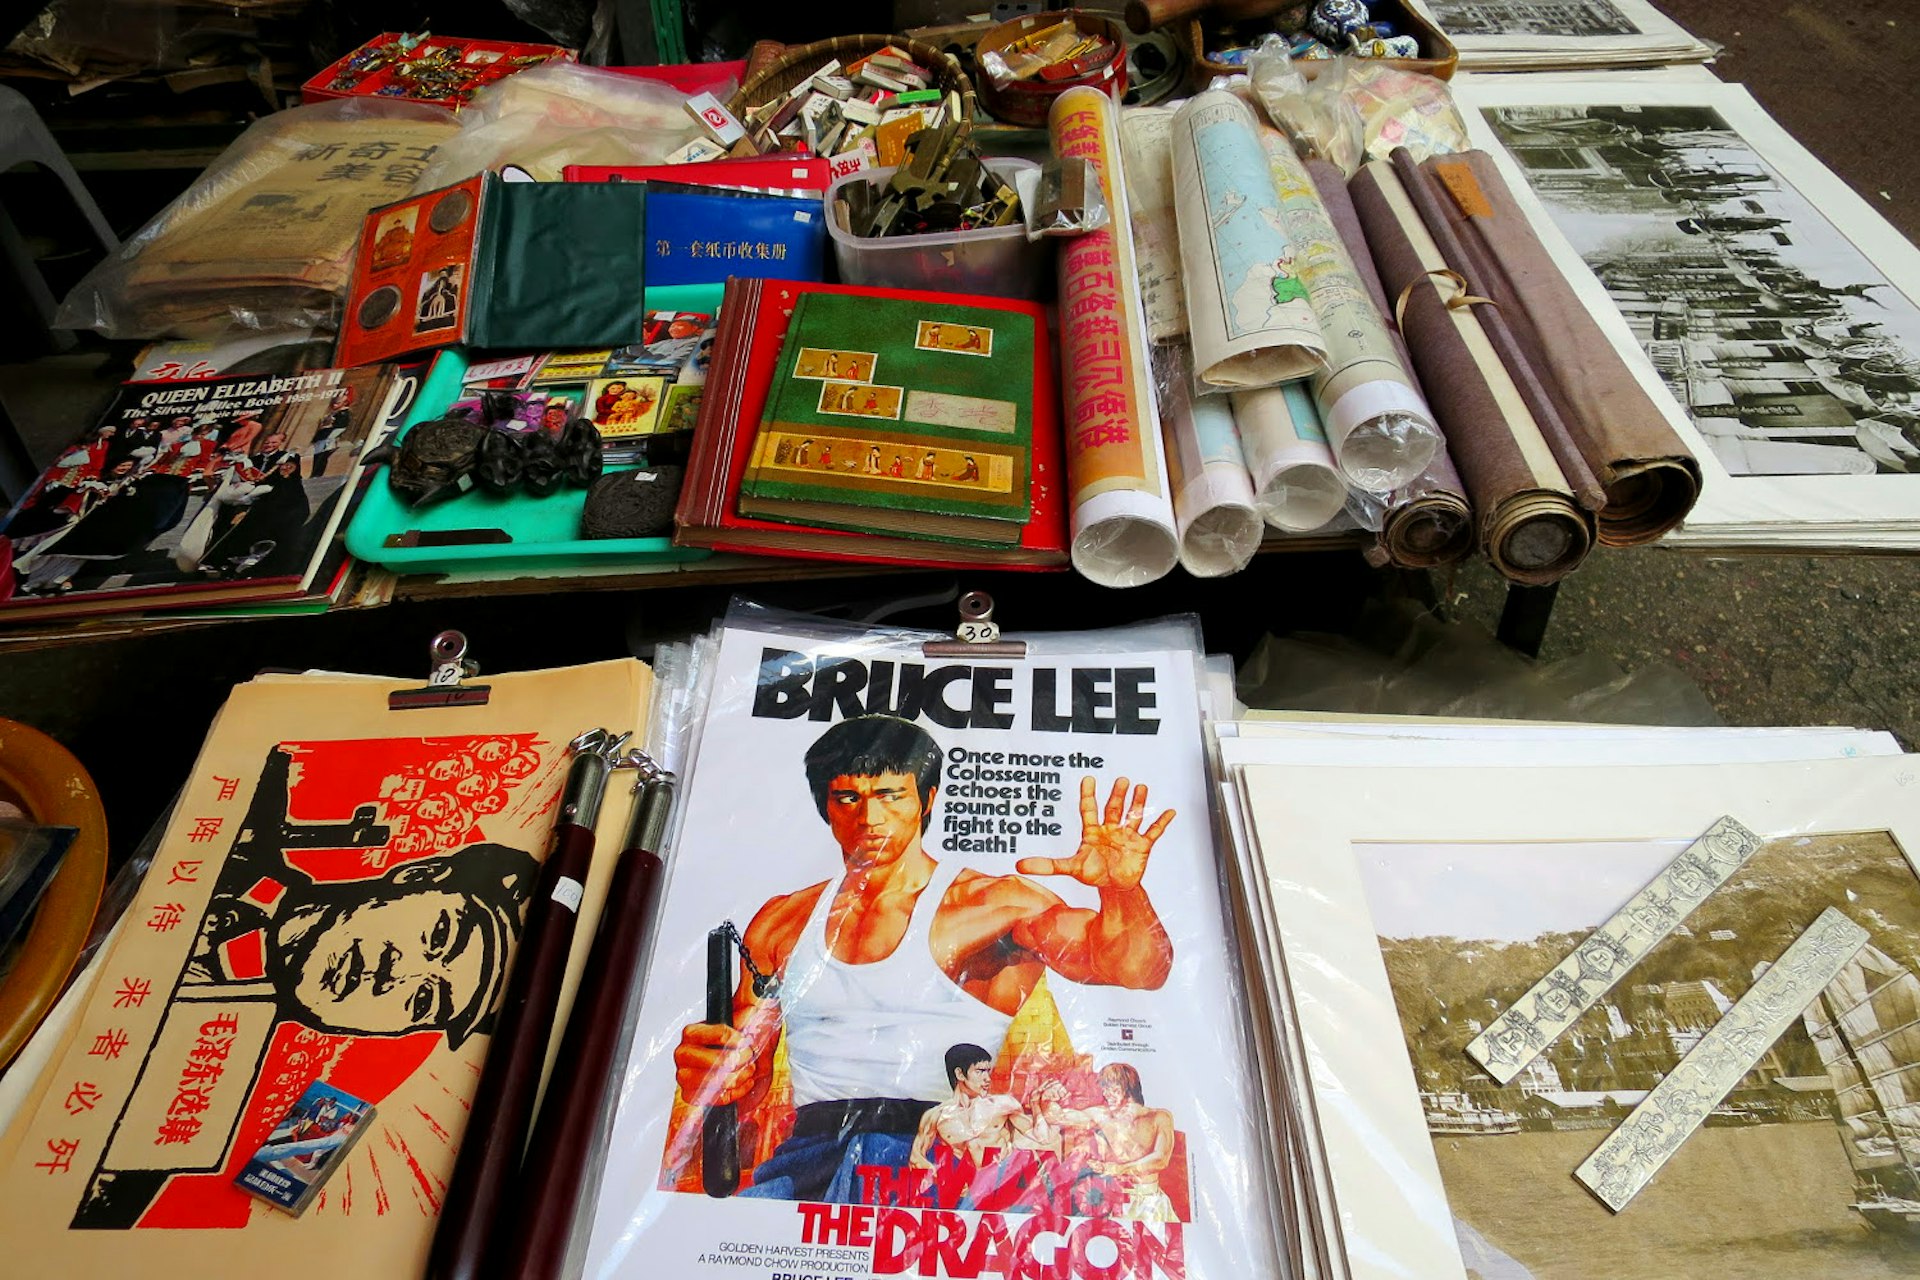 Bric-a-brac and posters for sale along Hollywood Rd. Image by Megan Eaves / Lonely Planet